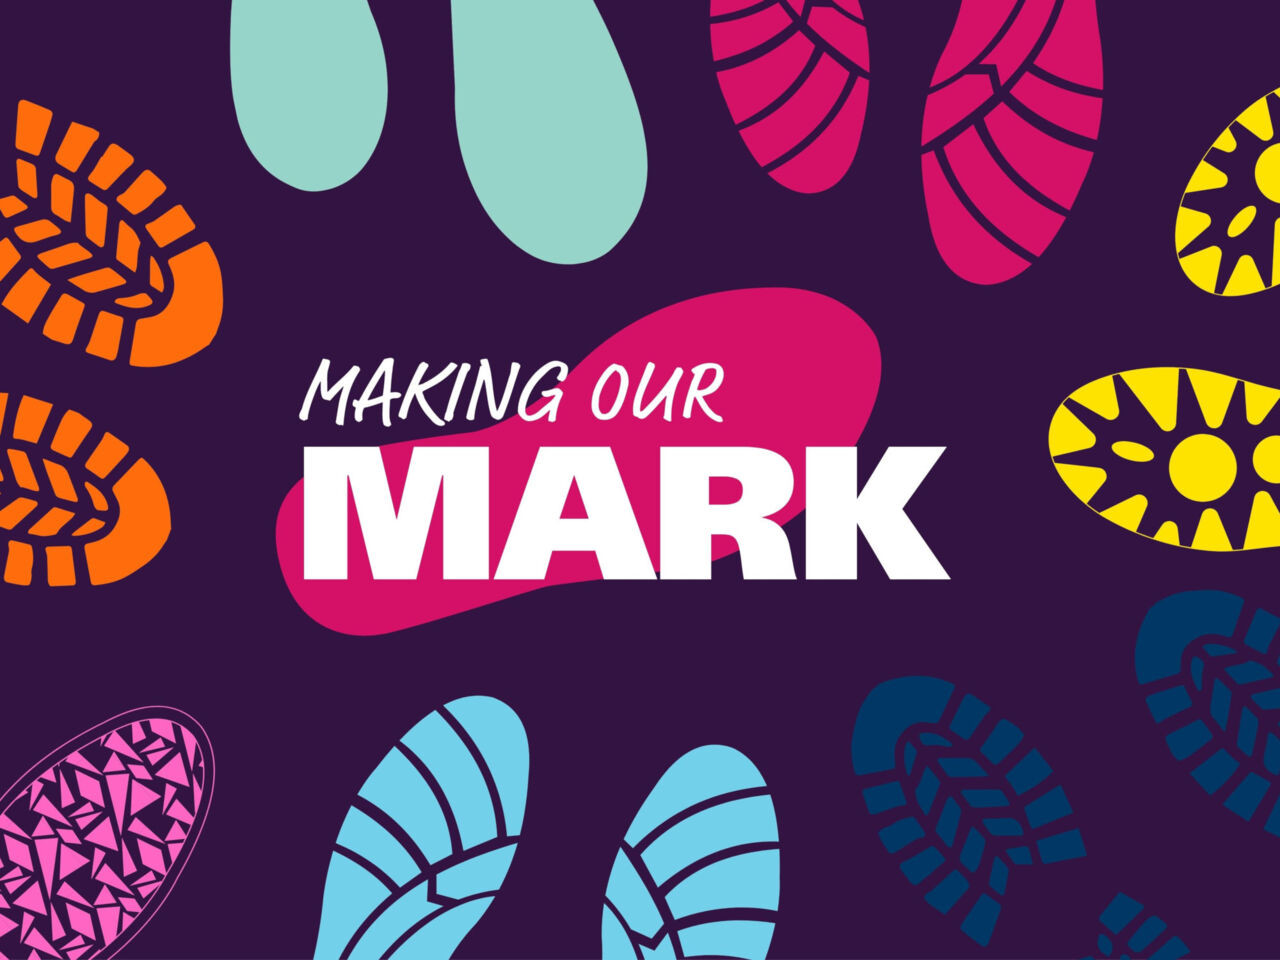 One hundred days, one hundred stories  — #WeAreMaking OurMark